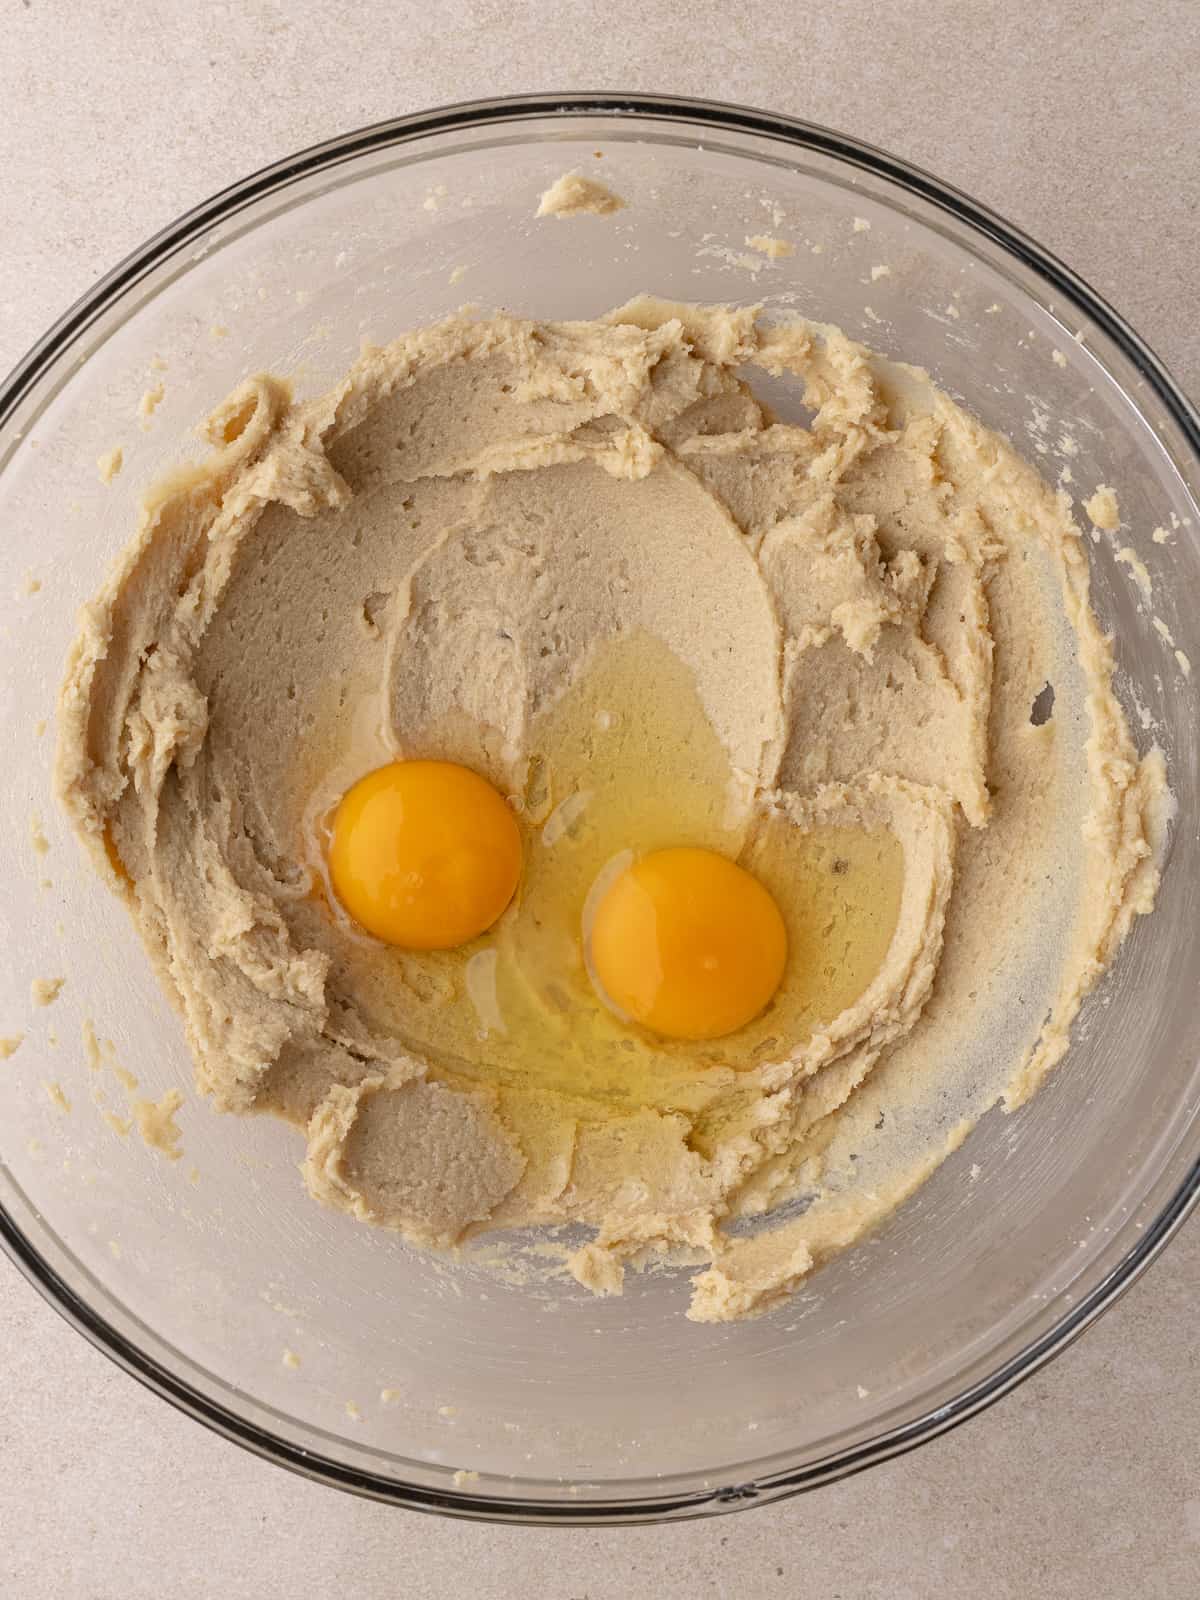 Egg and yolk is added to butter, sugar mixture